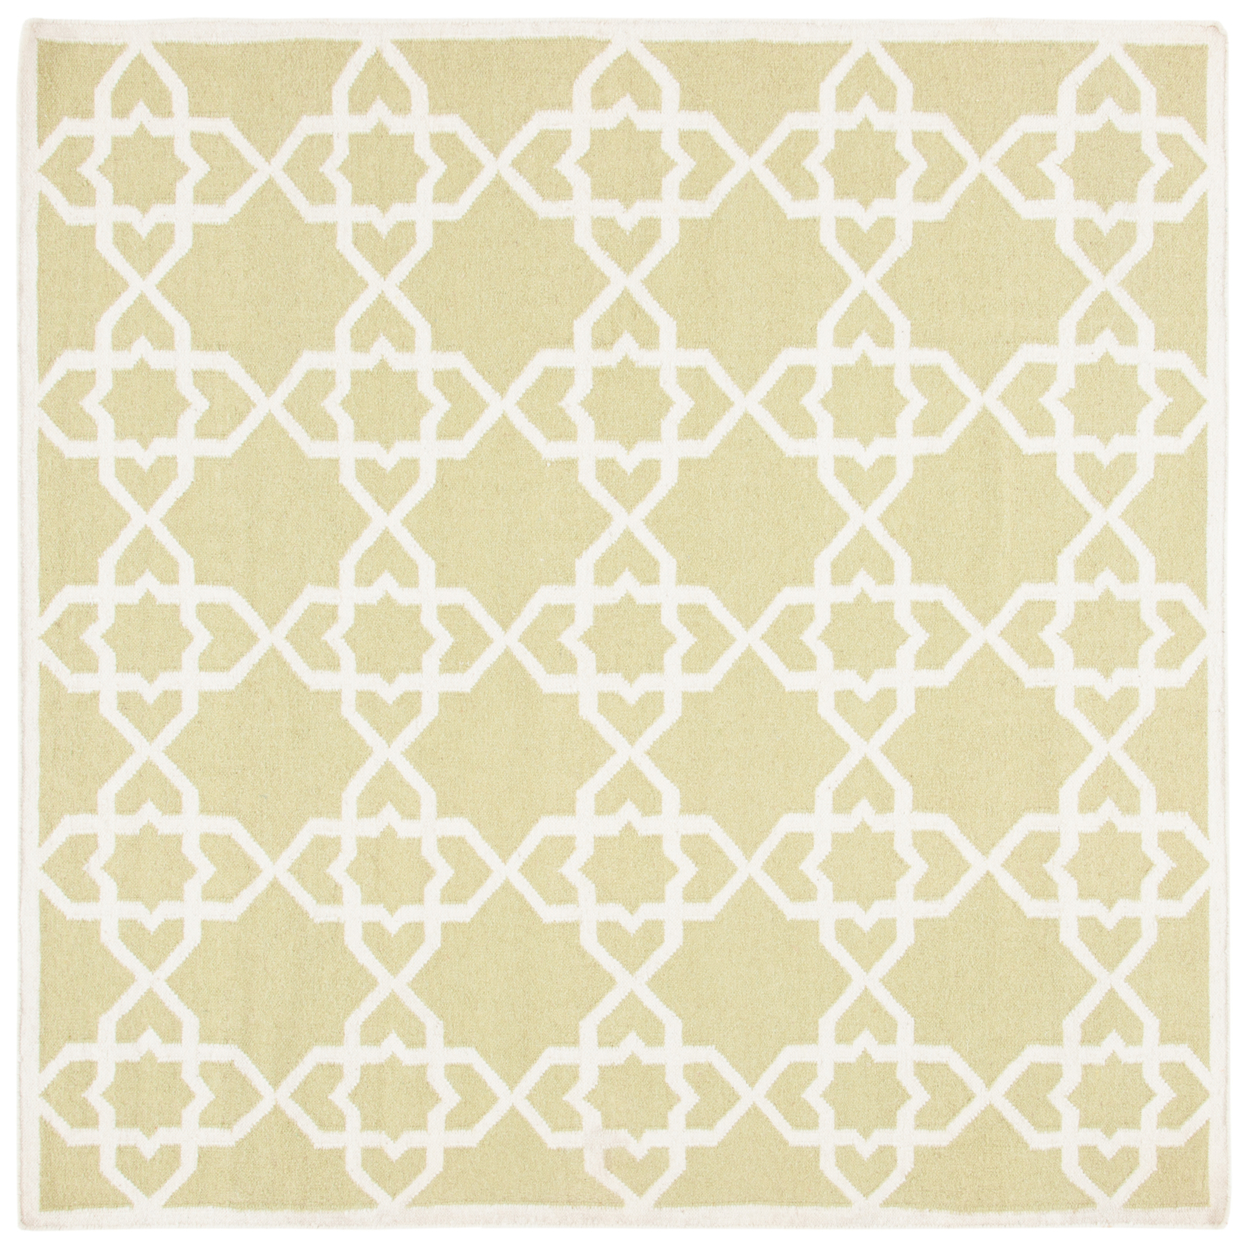 SAFAVIEH Dhurries DHU548A Handwoven Olive / Ivory Rug - 6' Square